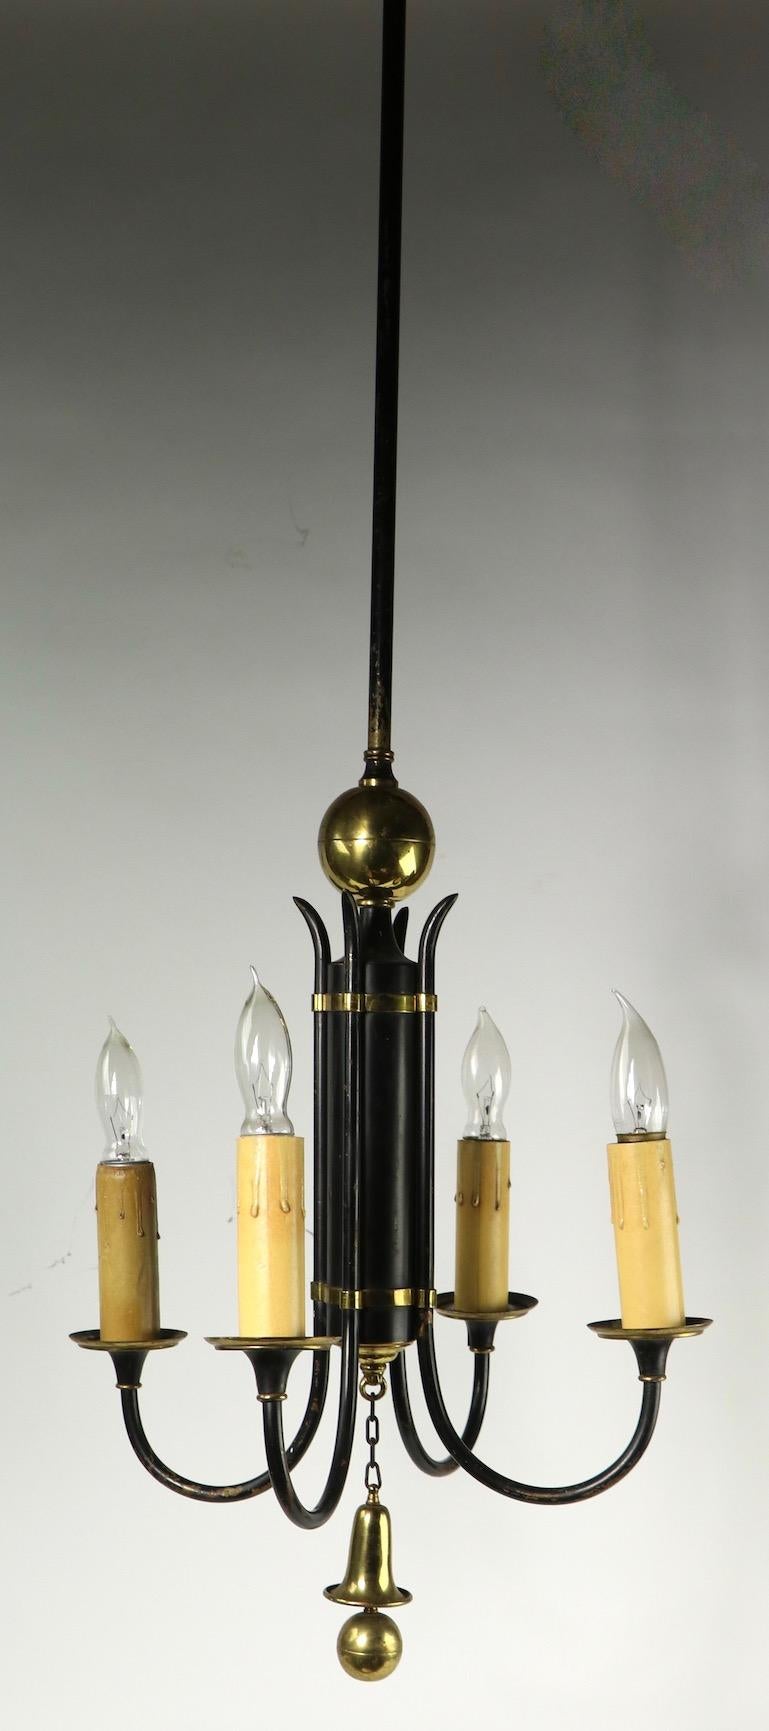 Stylish four-light chandelier, of black finished steel and brass trim. The fixture has four candle light sockets, attached to the cylindrical center body. This chandelier is good, original and working condition, it shows cosmetic wear to the finish,